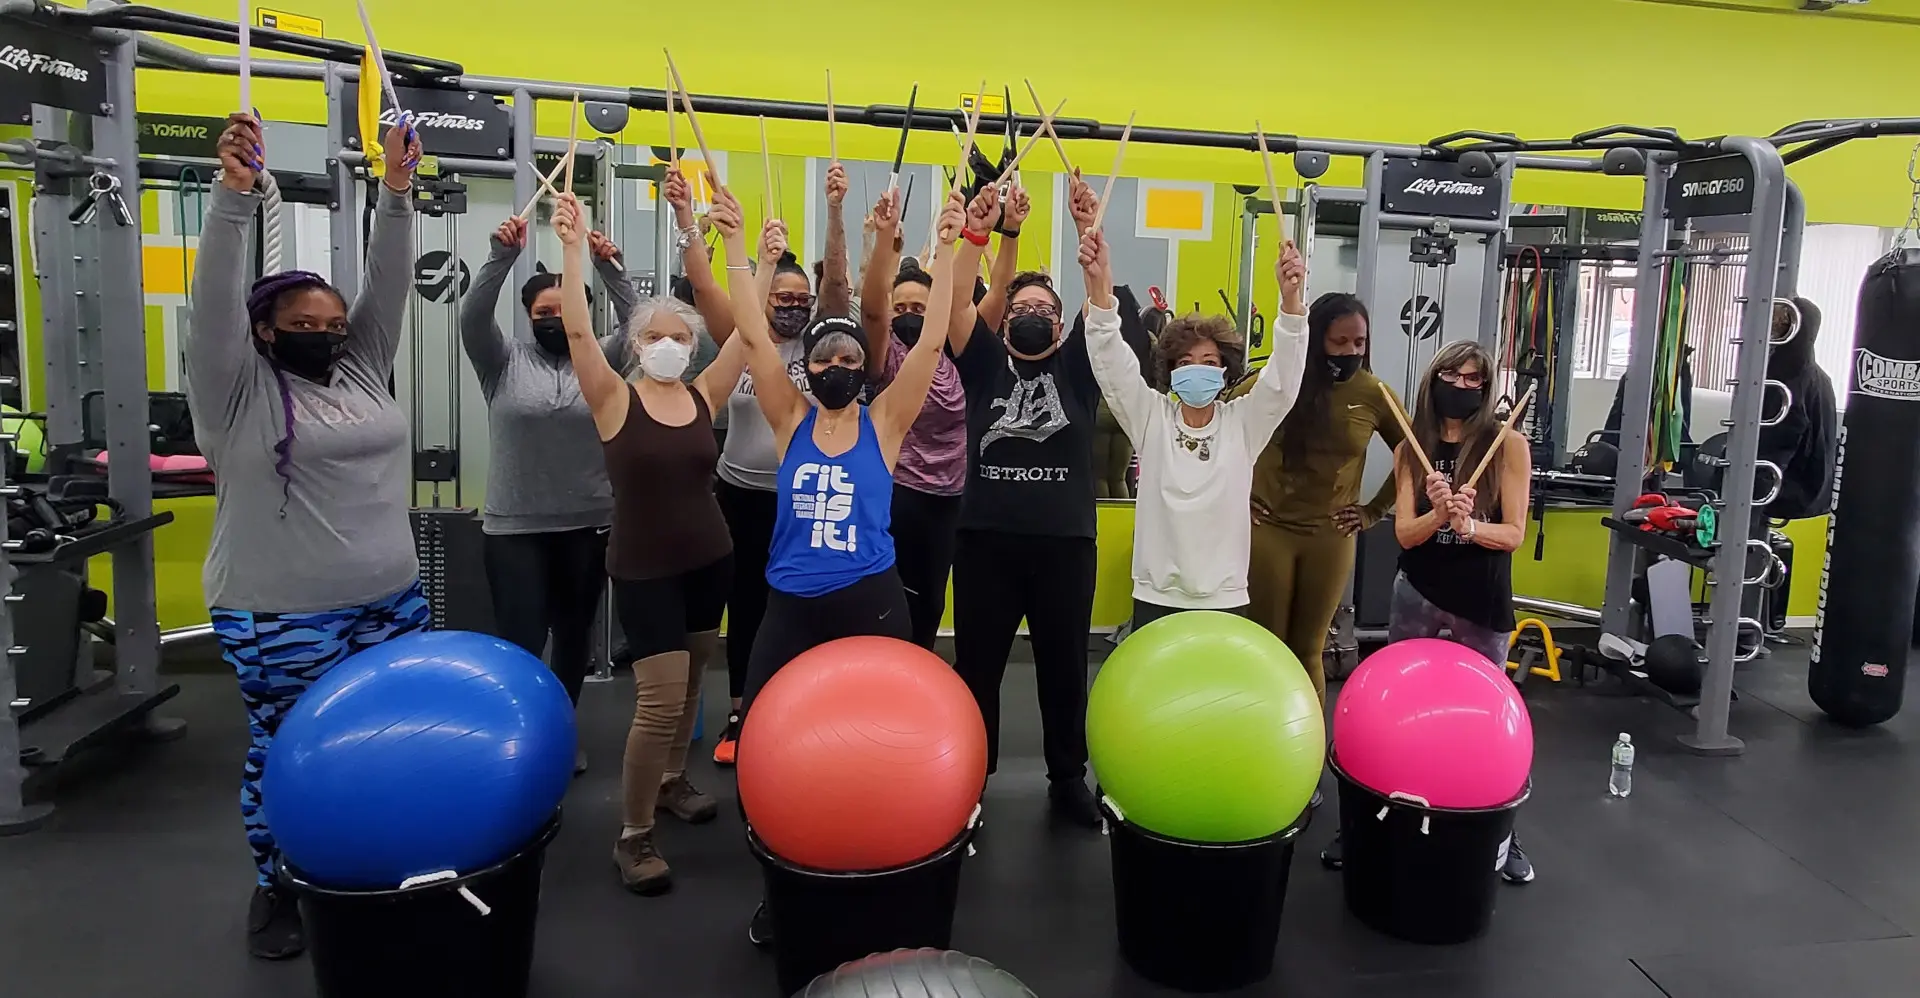 A group of people standing in front of some colorful balls.